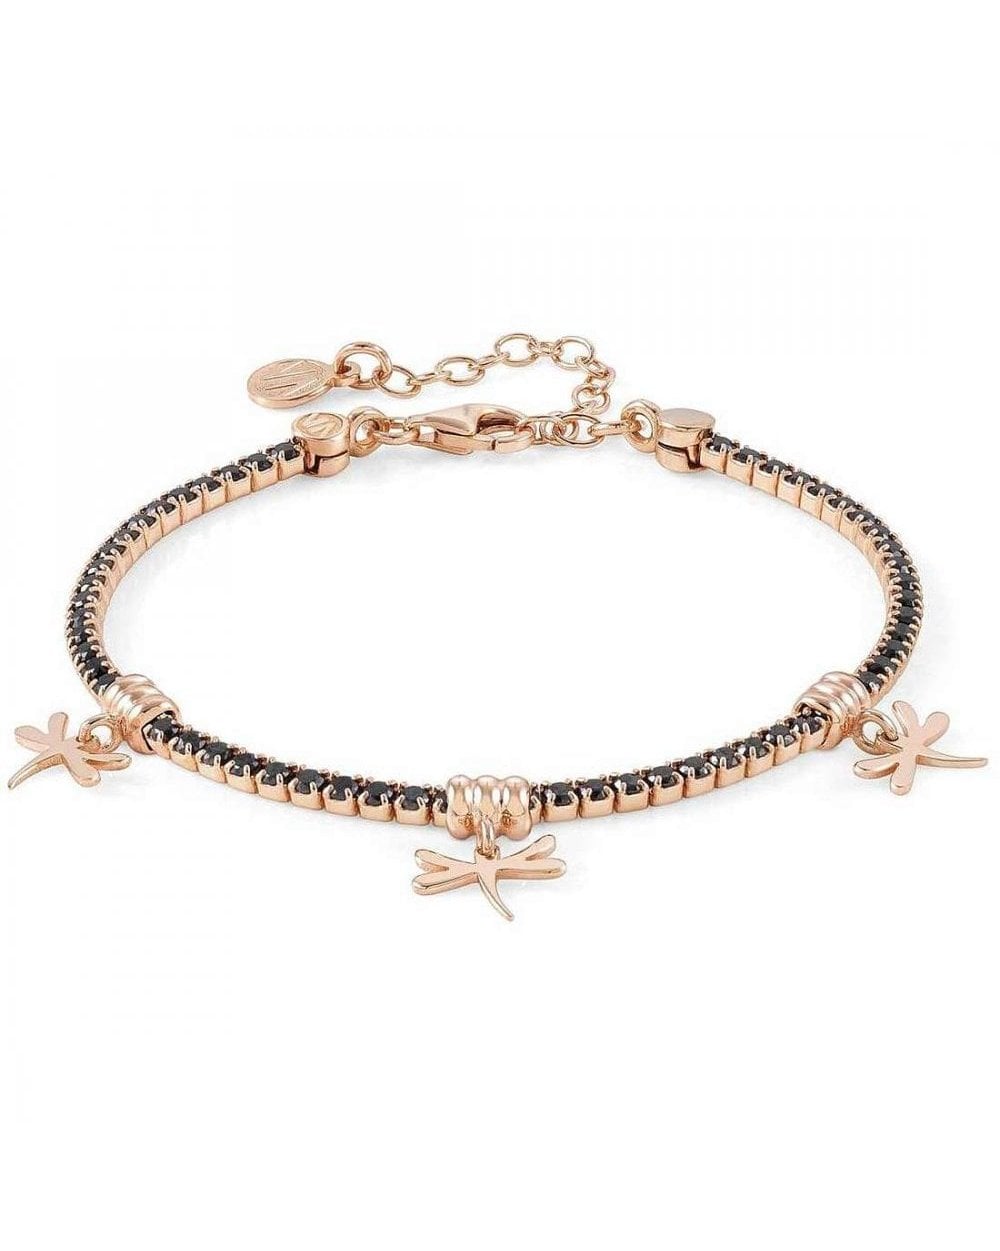 Chic&Charm Bracelet In 925 Silver And Cubic Zirconia Rose Gold Dragonfly